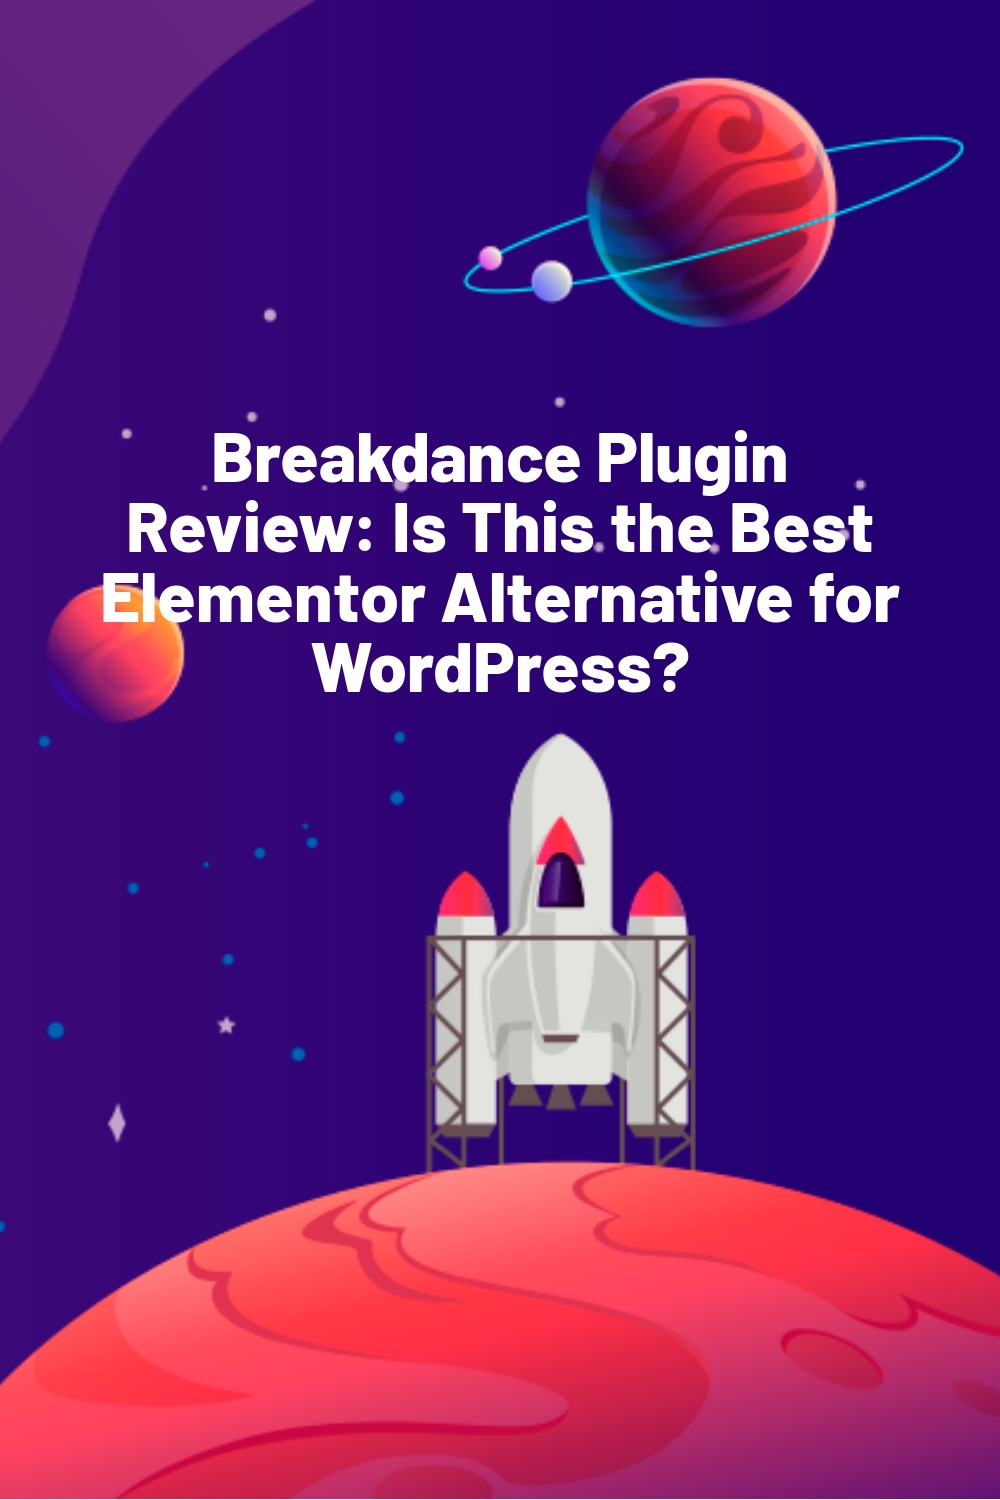 Breakdance Plugin Review: Is This the Best Elementor Alternative for WordPress?